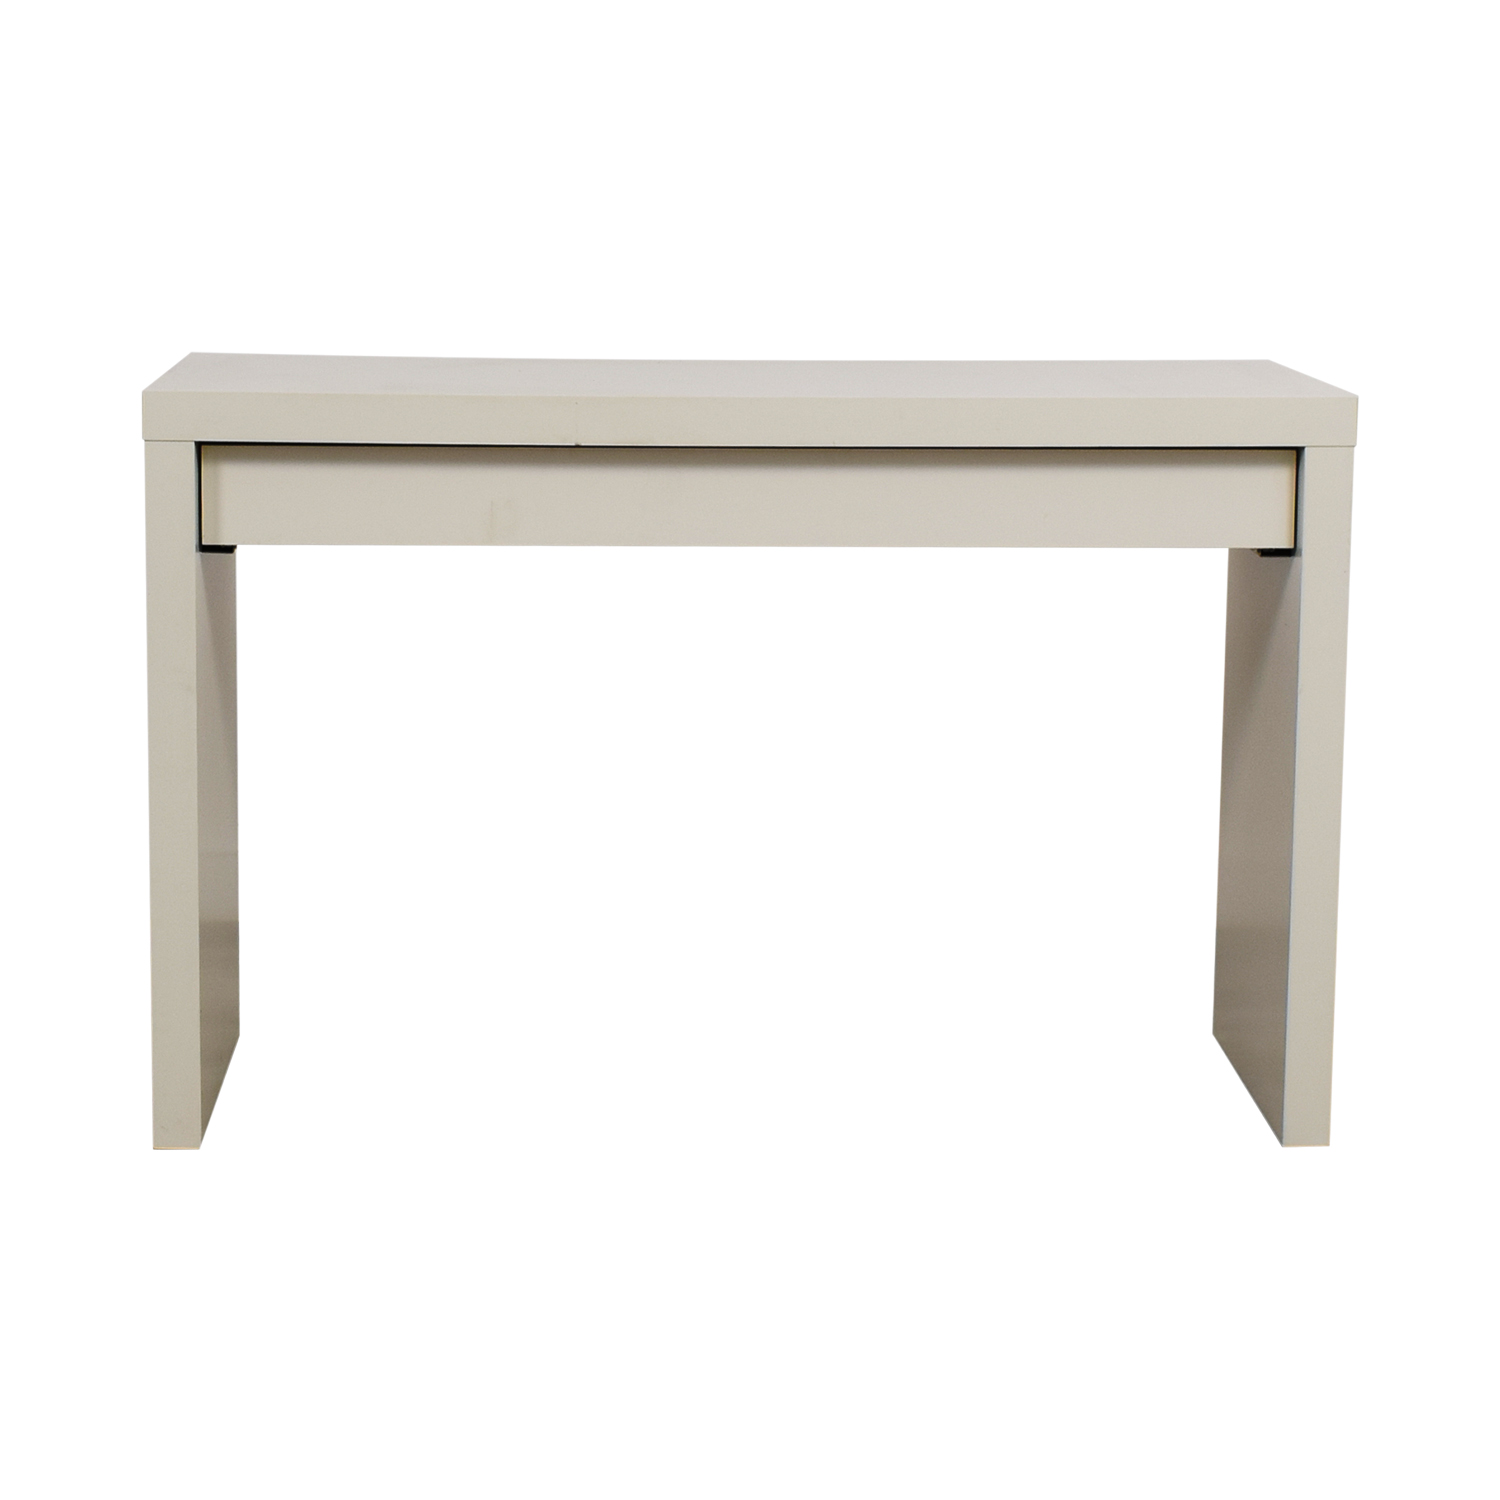 off ikea malm white single drawer narrow desk table accent tables metal end with small decorative battery operated lamps countertop wine rack target threshold round garden bedroom